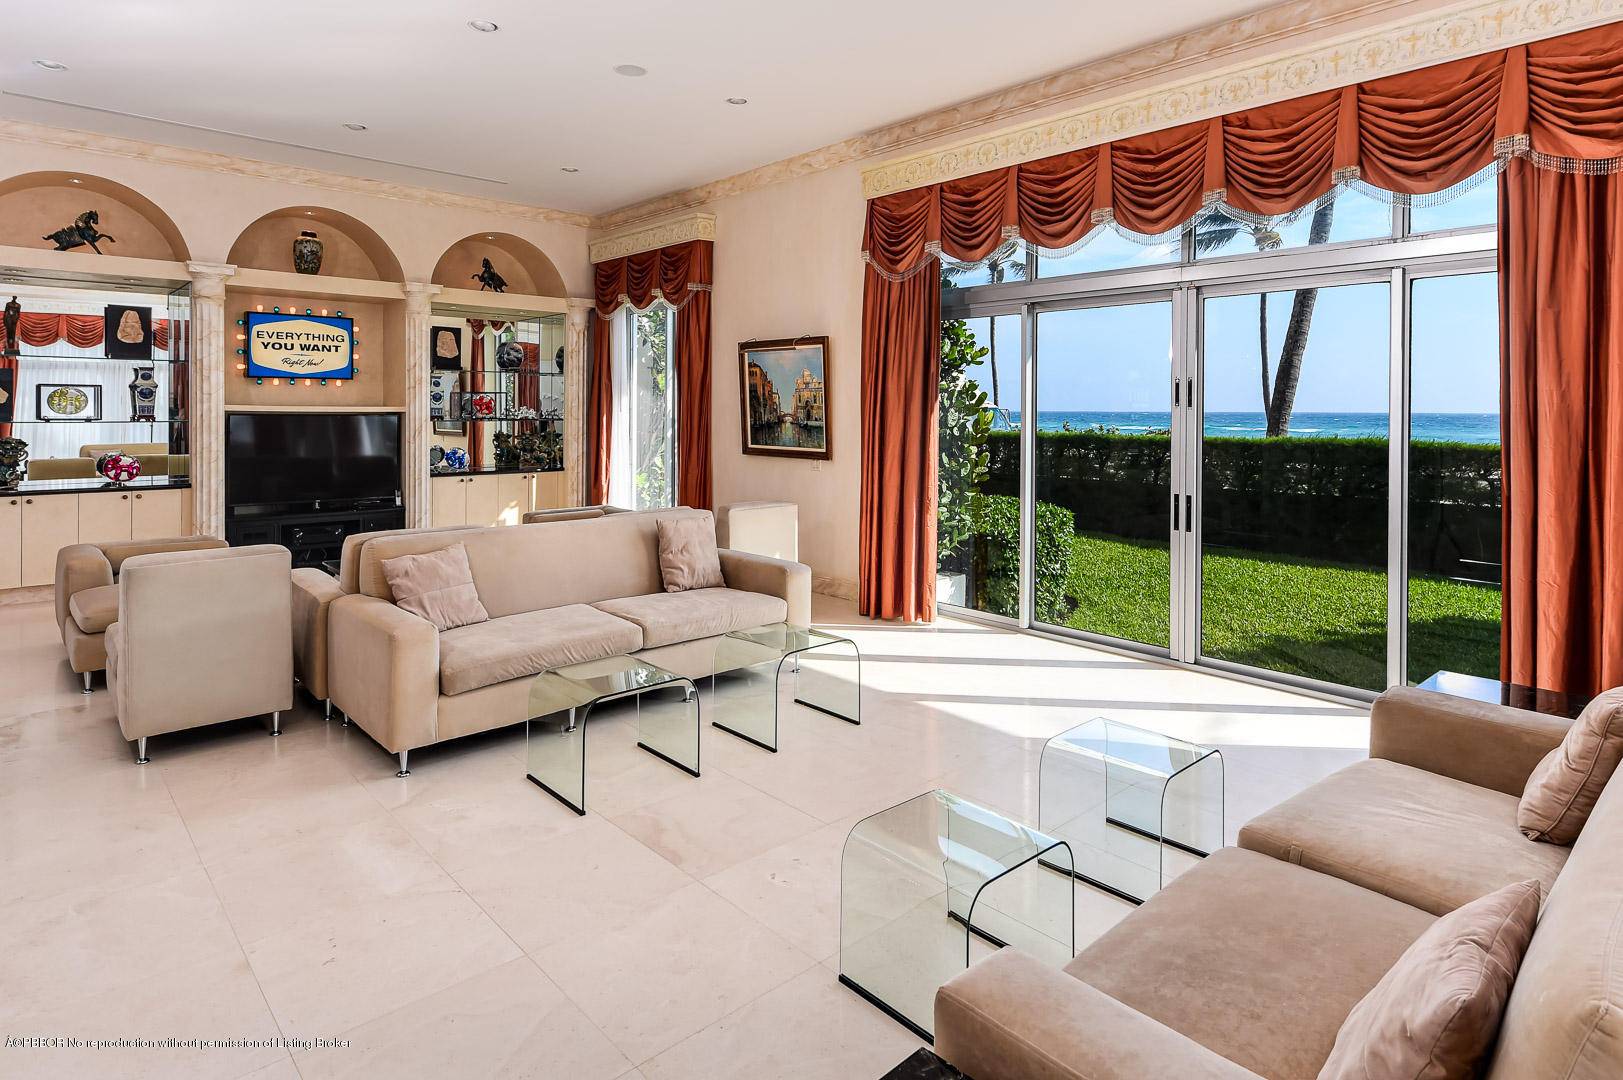 Private and exclusive oceanfront condo with 12 14' ceilings.